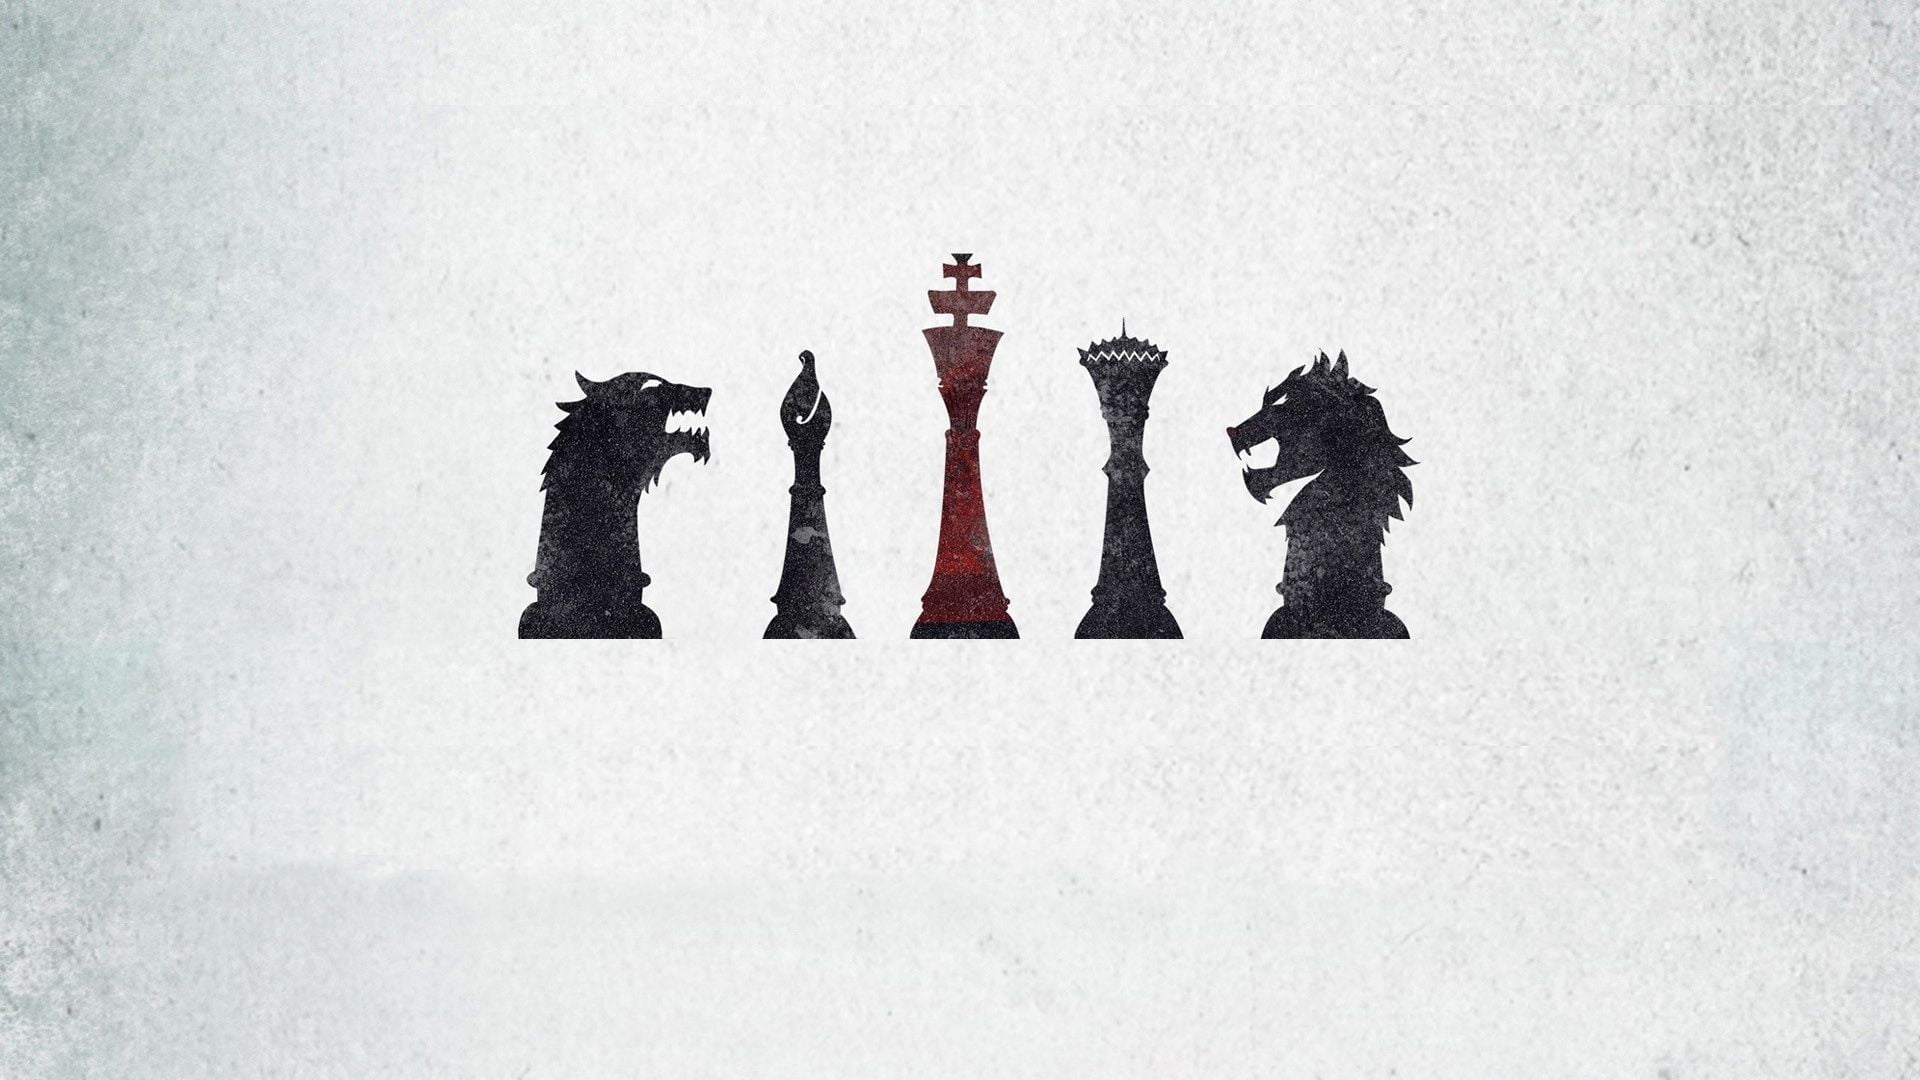 Game of Thrones Sigils chess